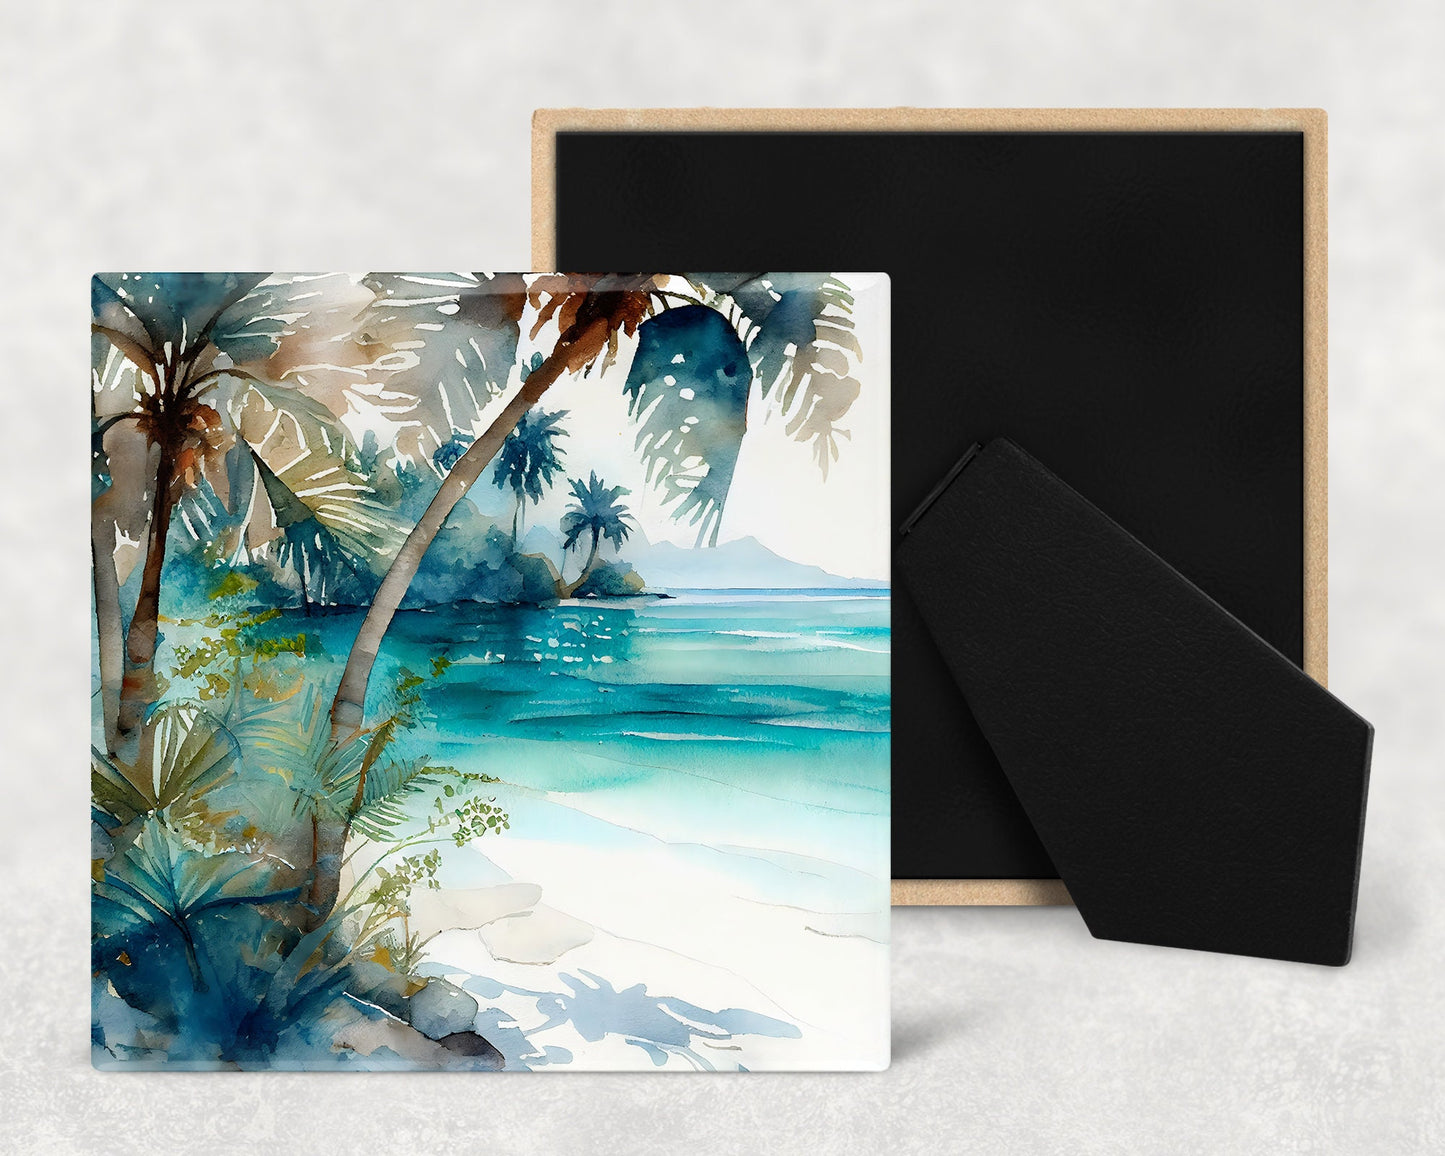 Beach Life Island Art Decorative Ceramic Tile Set with Optional Easel Back - Available in 4 sizes - Set of 4